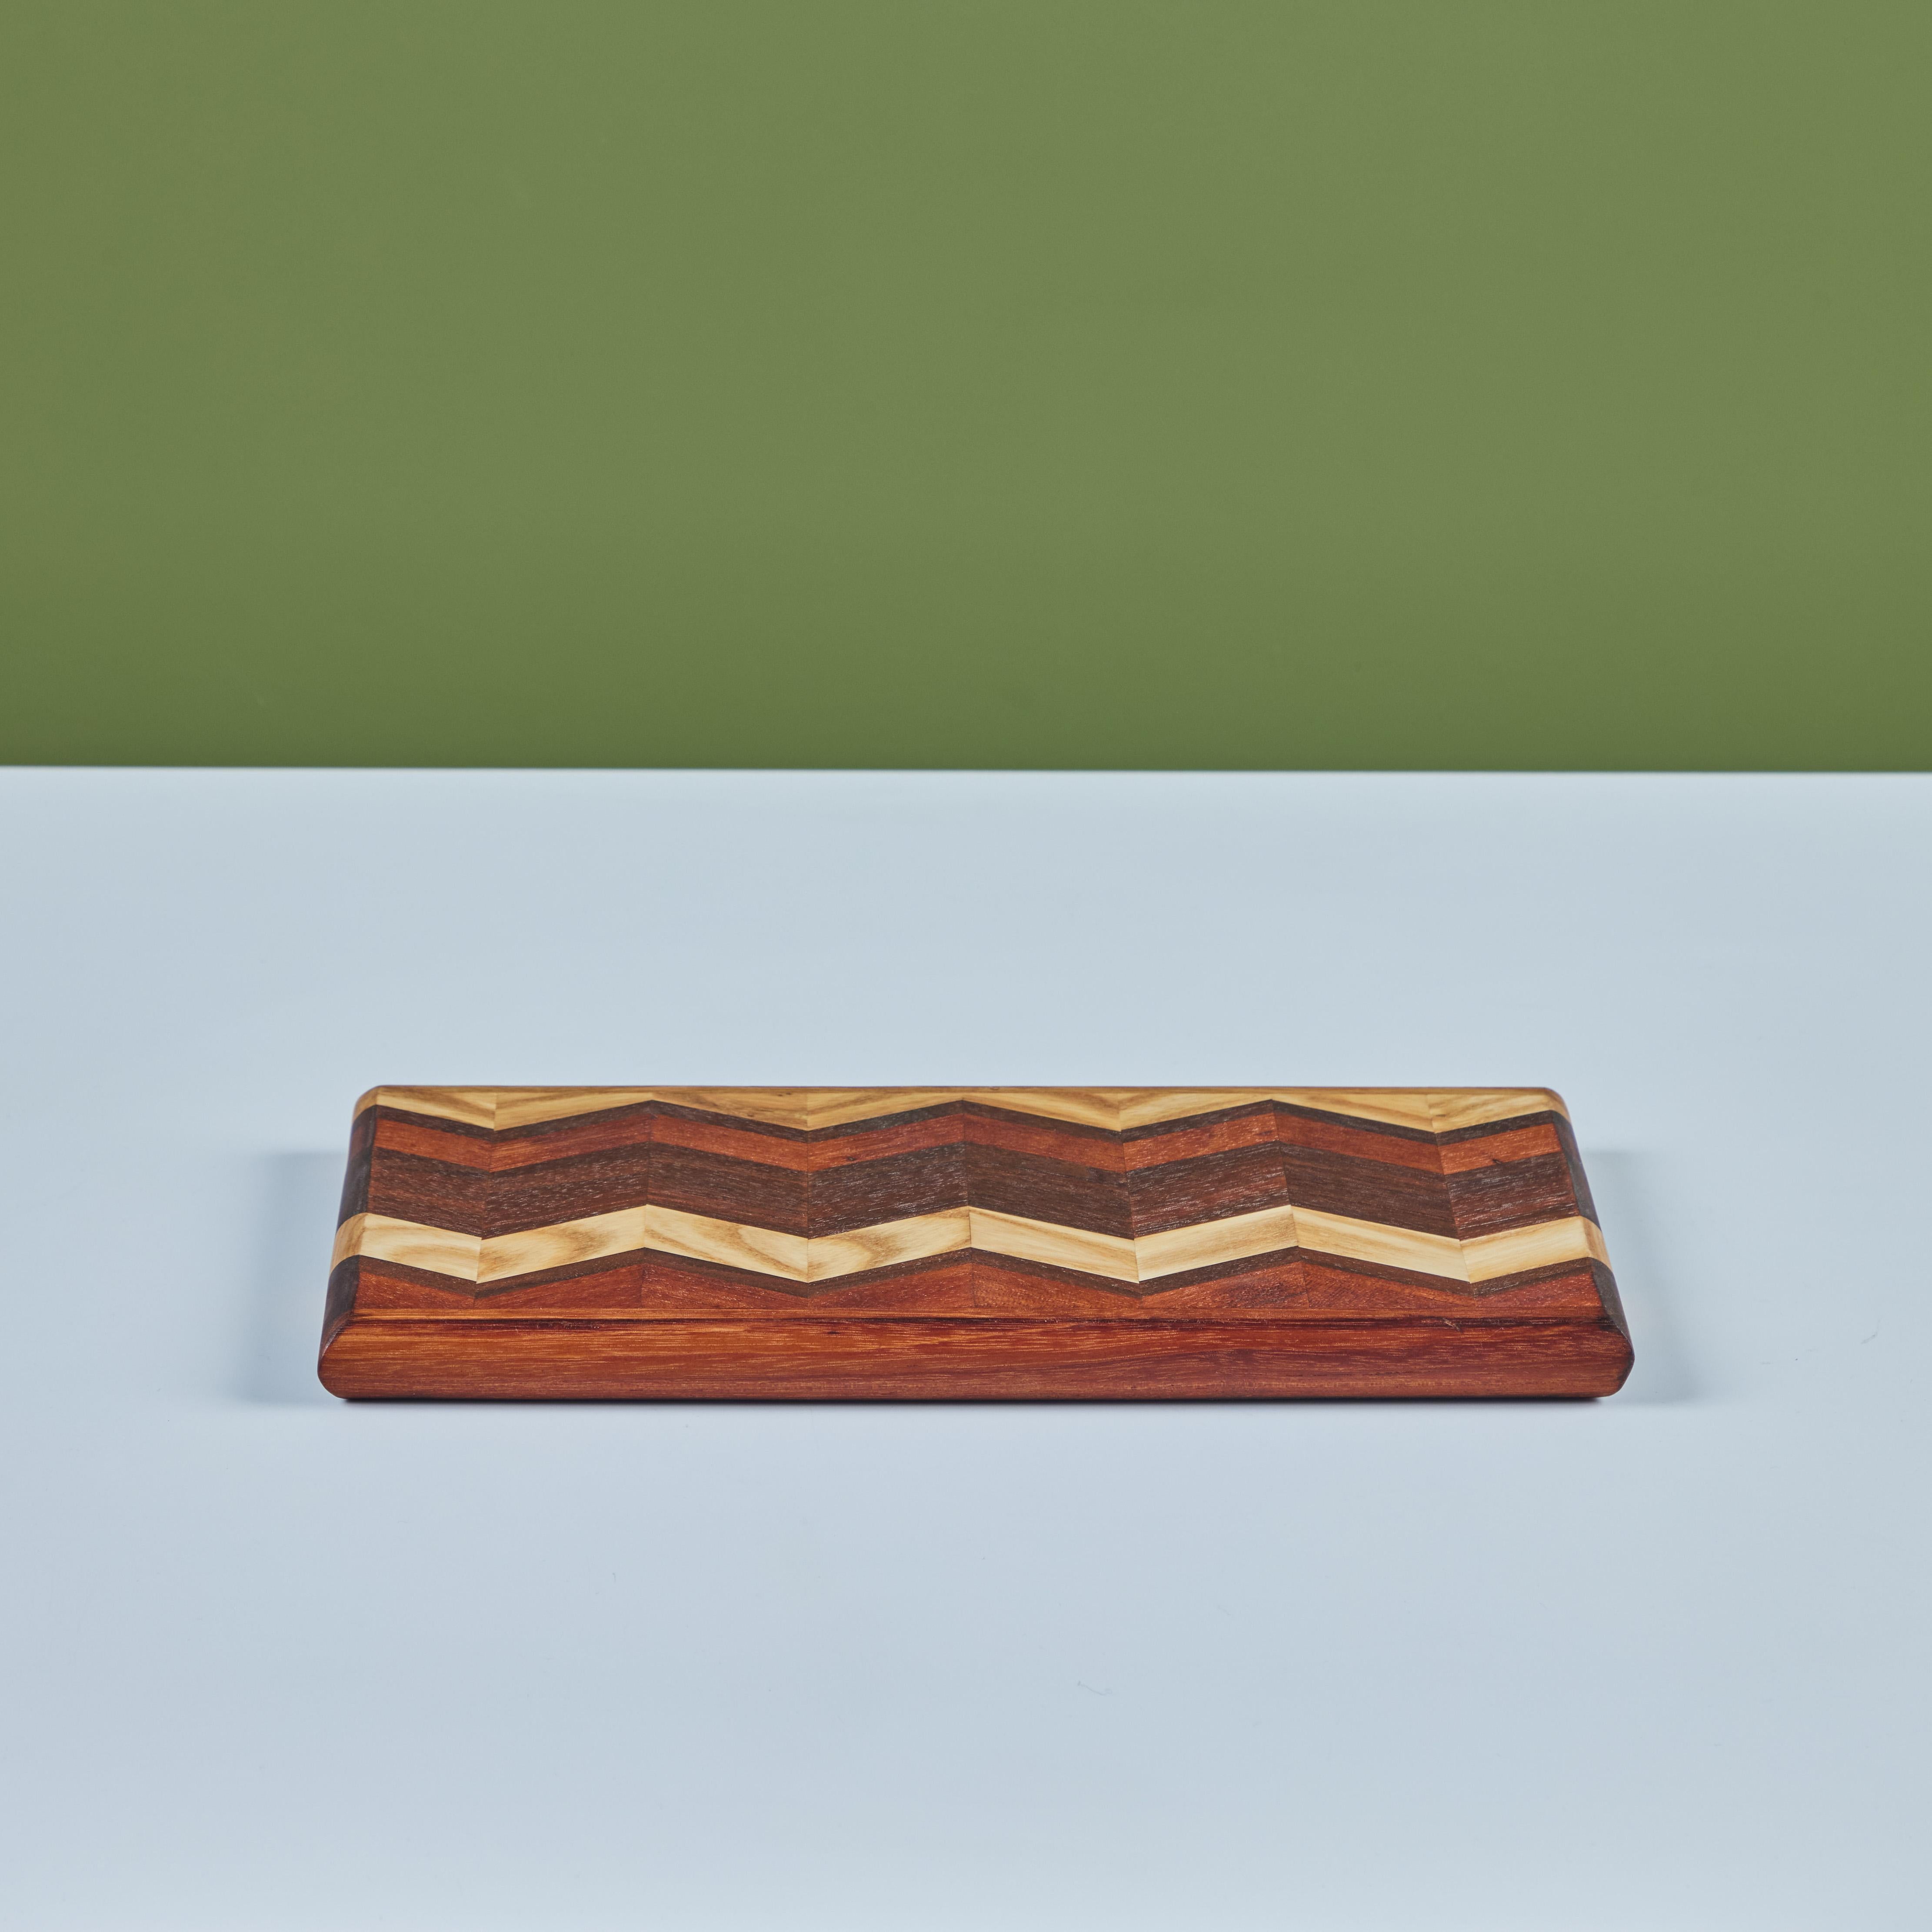 Marquetry Don Shoemaker Wood Inlaid Chevron Pattern Cutting Board for Señal For Sale